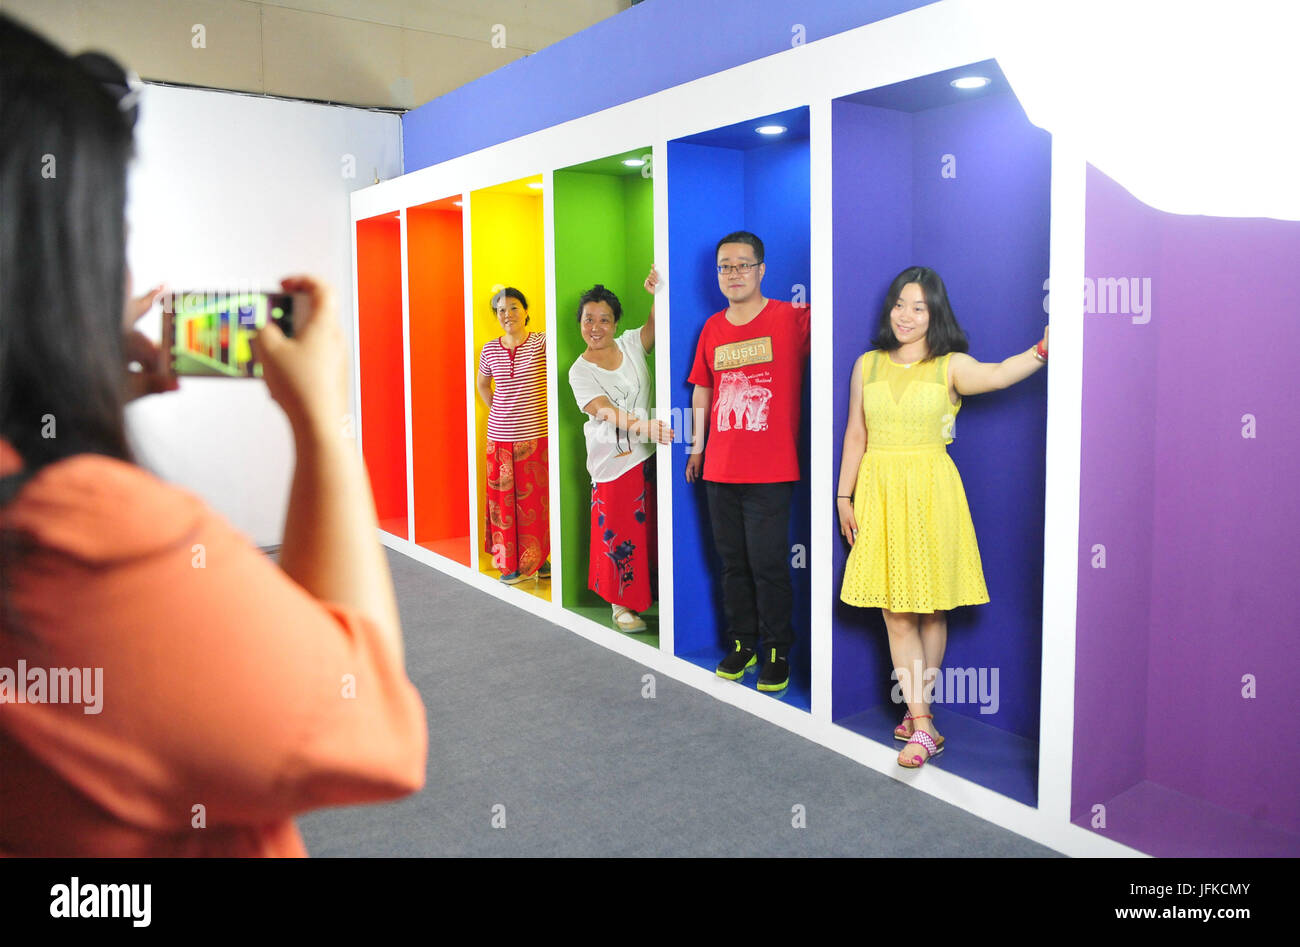 Beijing, China. 1st July, 2017. Visitors pose for photos during a photo studio exhibition in Beijing, capital of China, July 1, 2017. More than 100 shooting scenes and more than 200 lights are set during the exhibition, with which people can create their own photos. The exhibition will last until October. Credit: Xiao Xiao/Xinhua/Alamy Live News Stock Photo